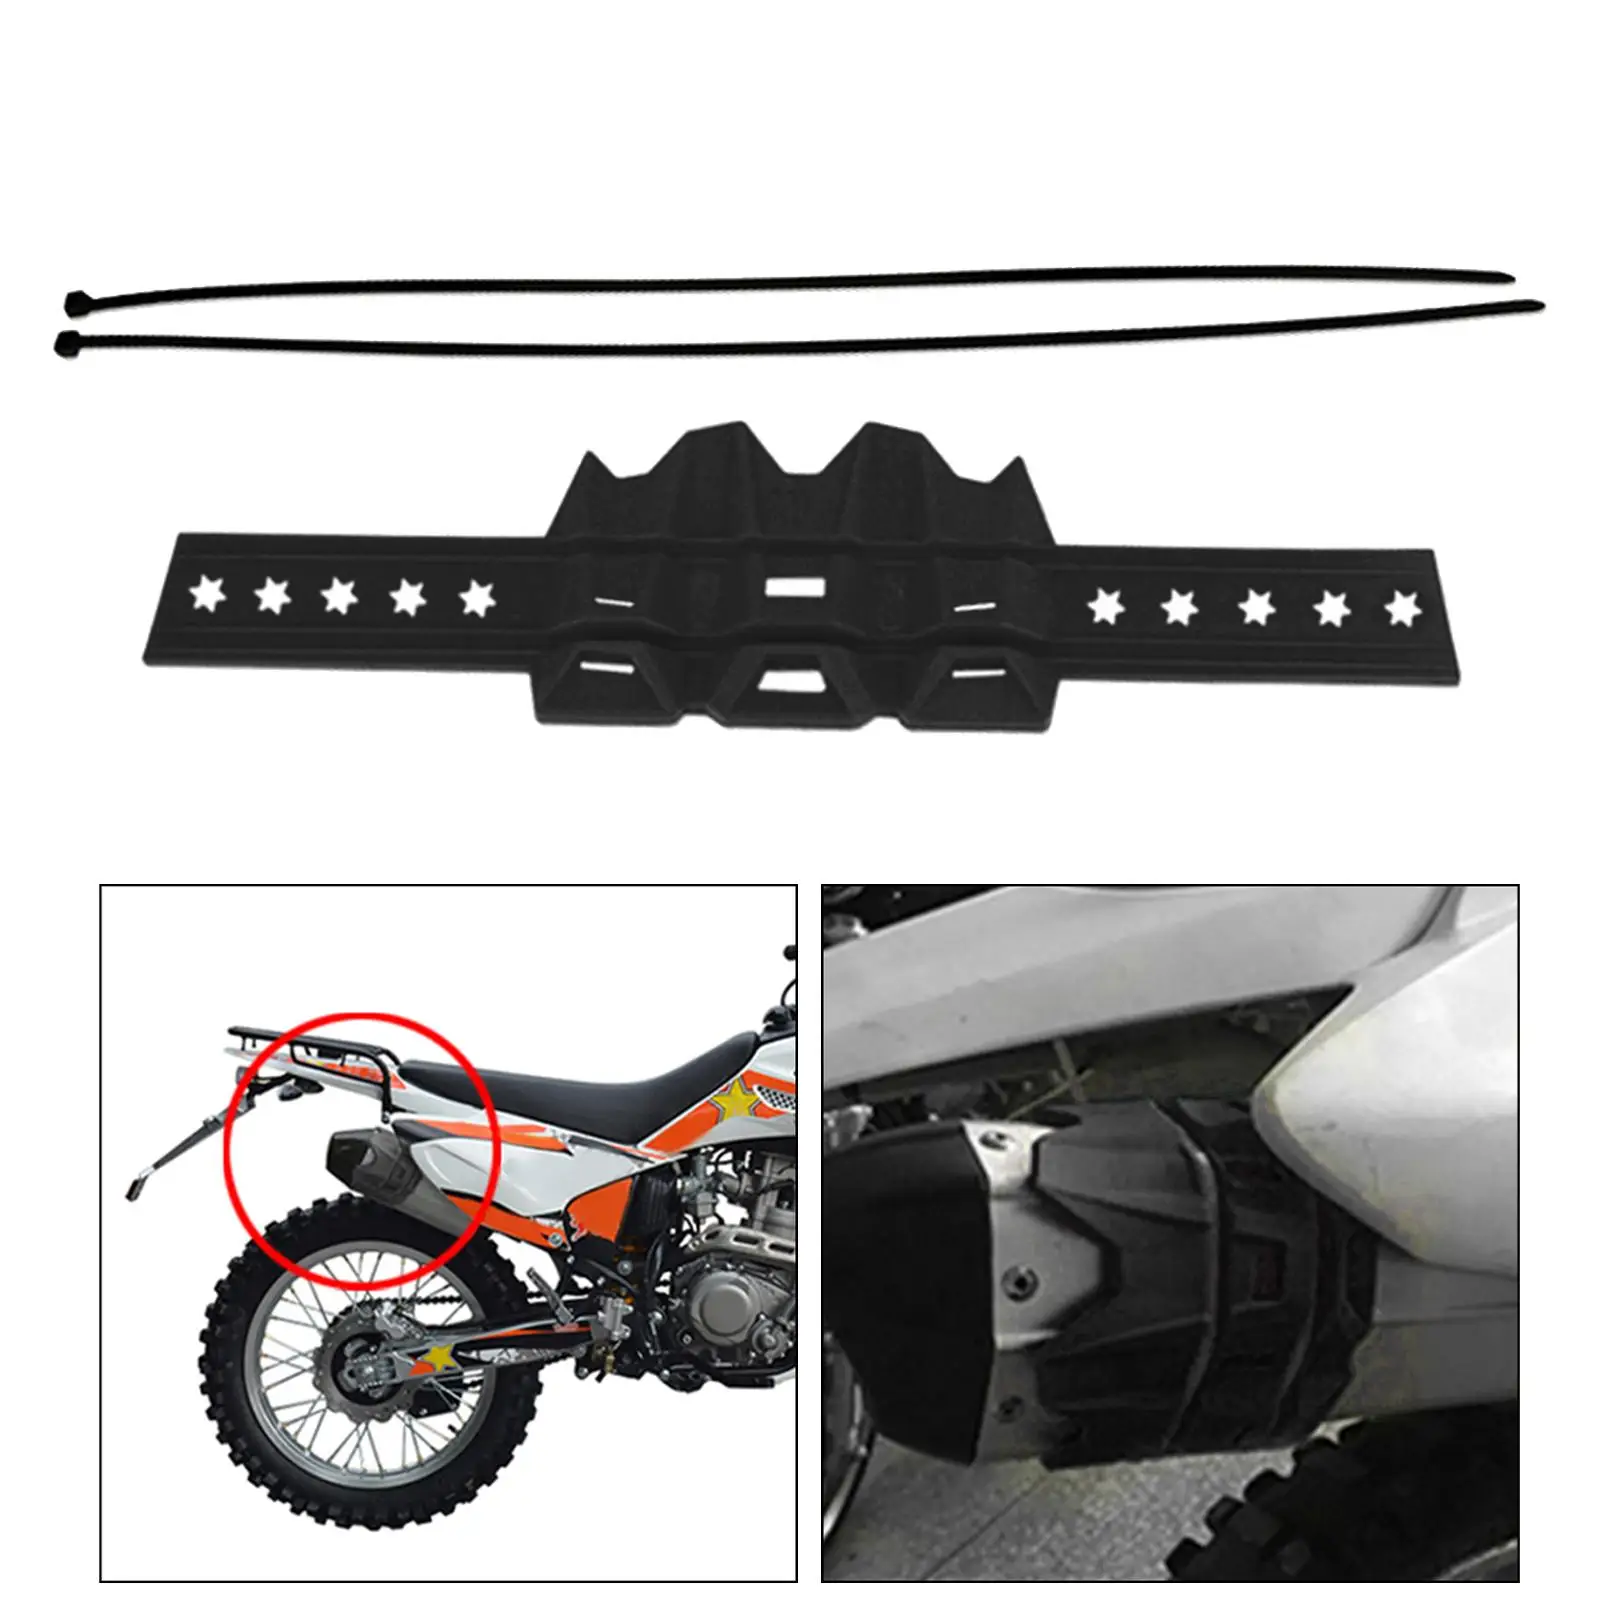 3X Motorcycle Exhaust Protector Guard Cover f/ Dirt Bike Black